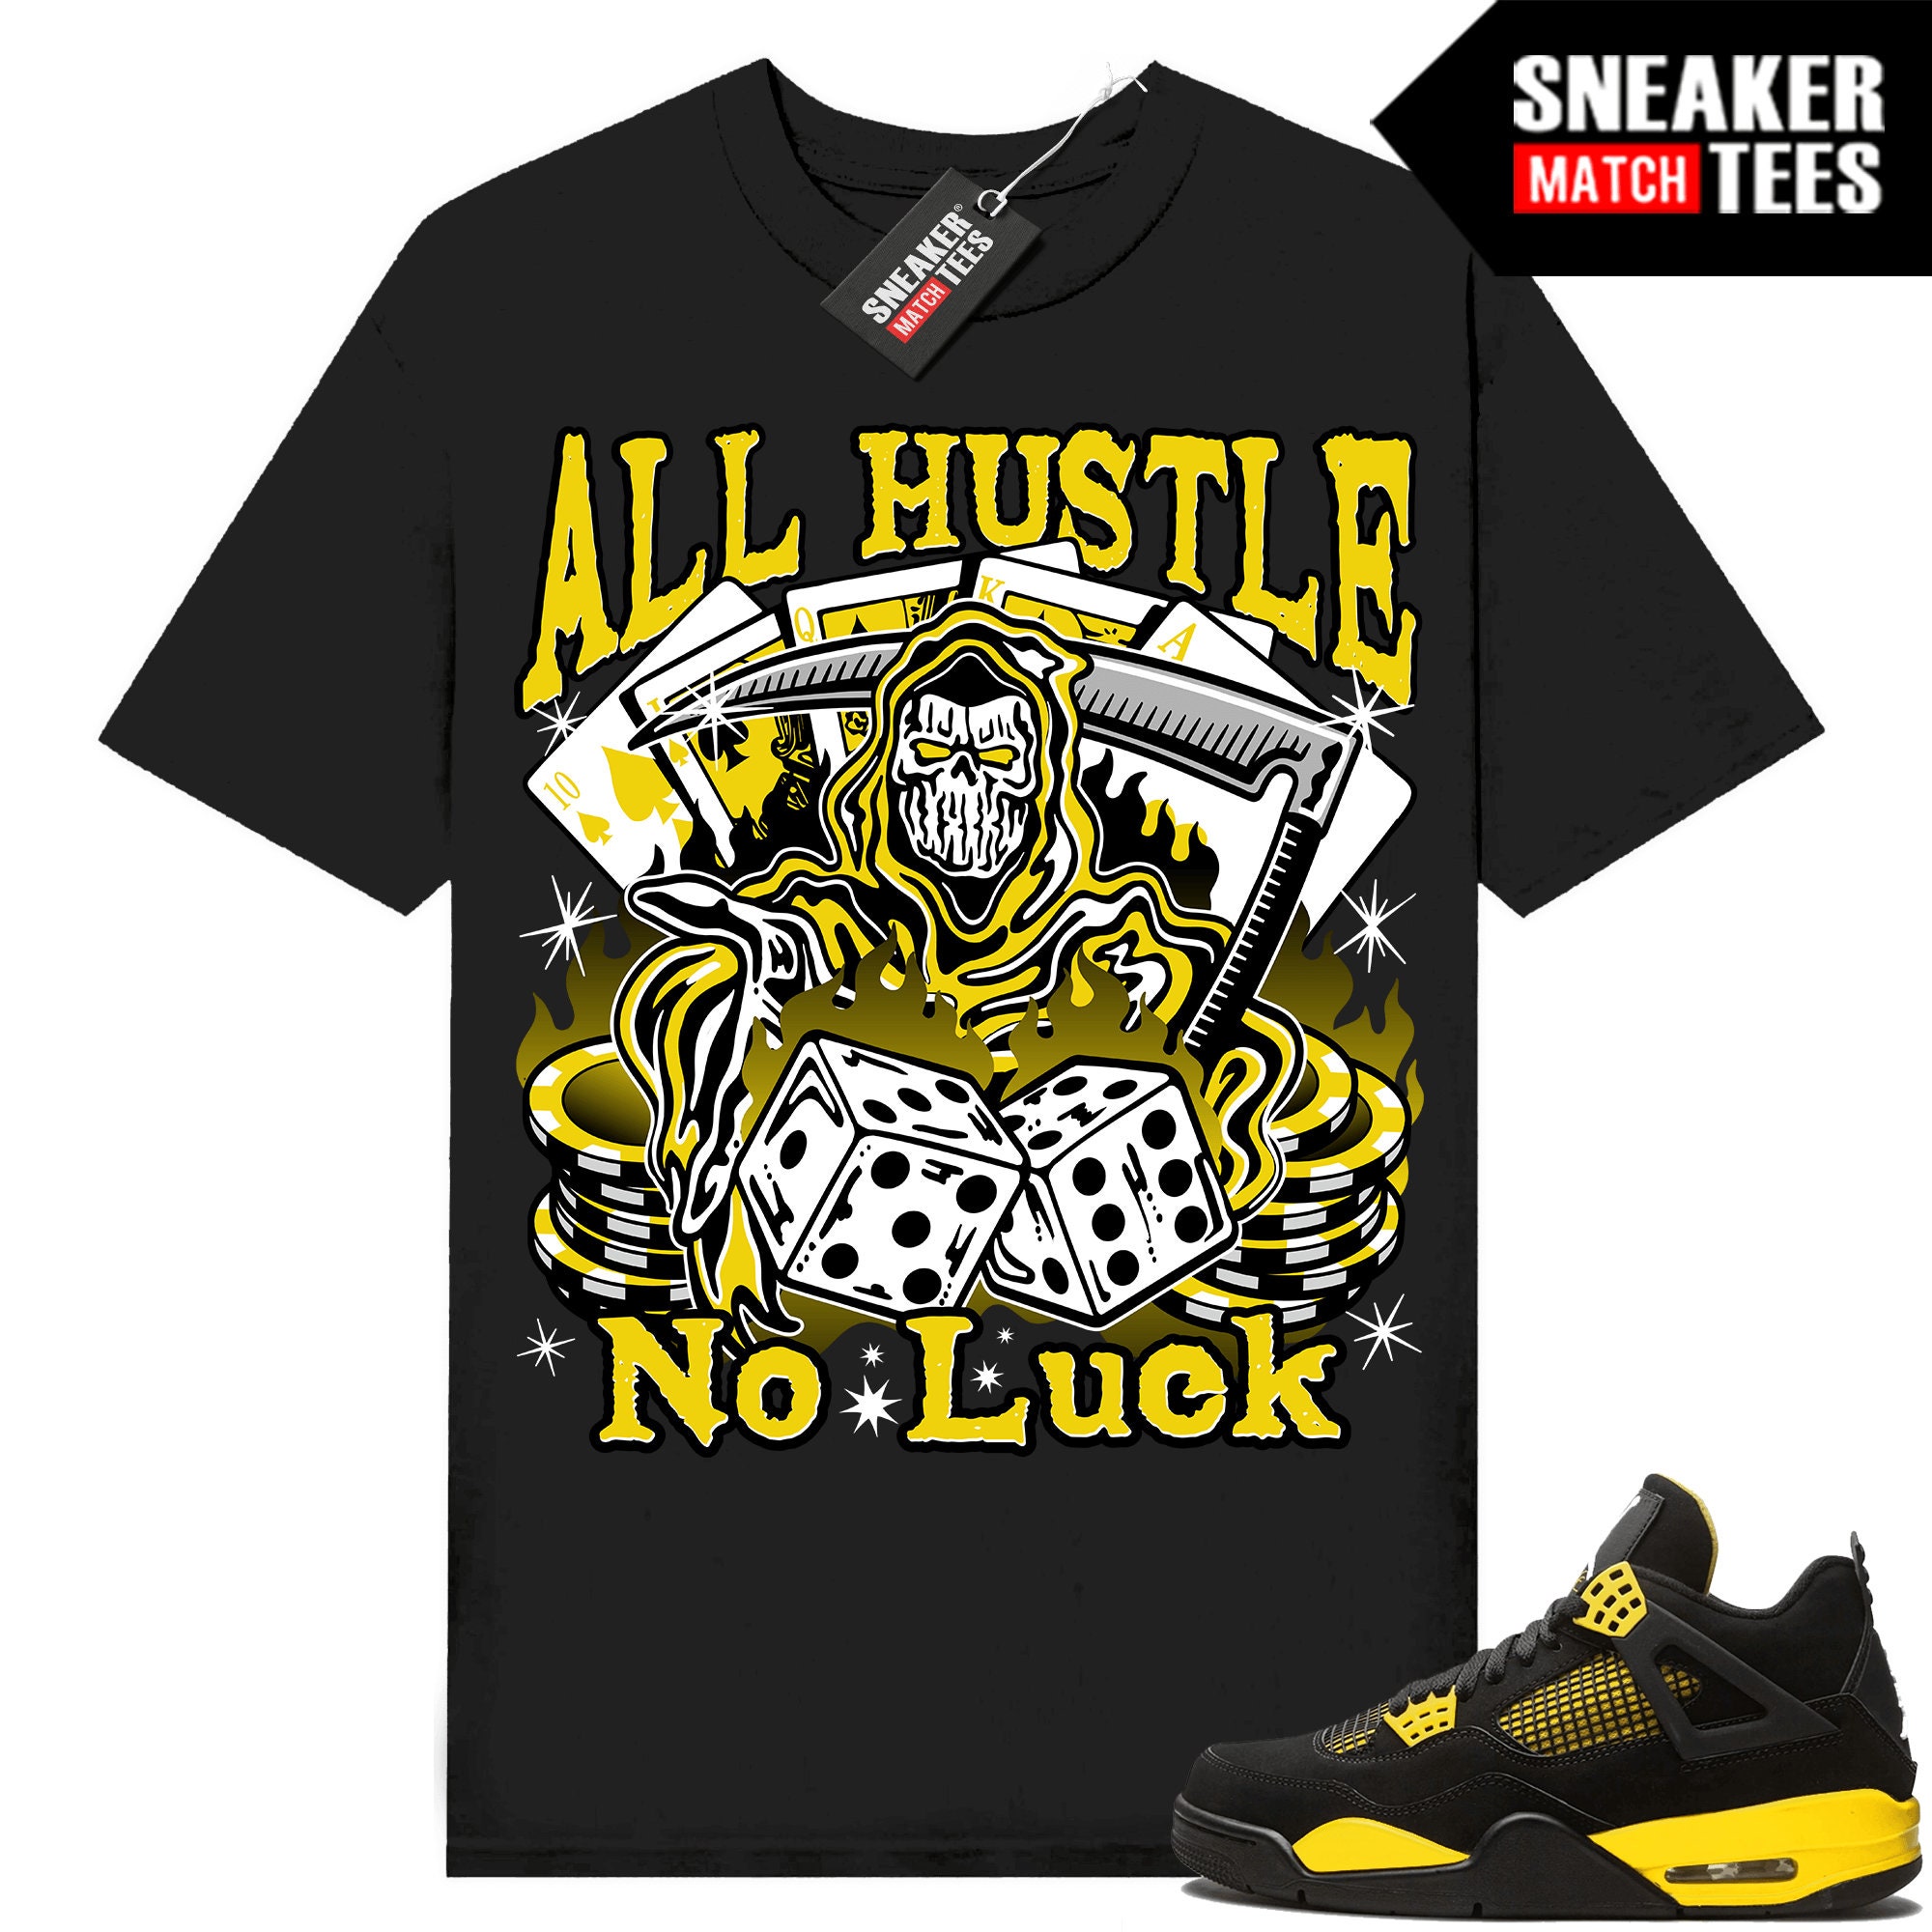 Thunder 4s shirts to match Sneaker Match Tees Black "All Hustle No Luck"